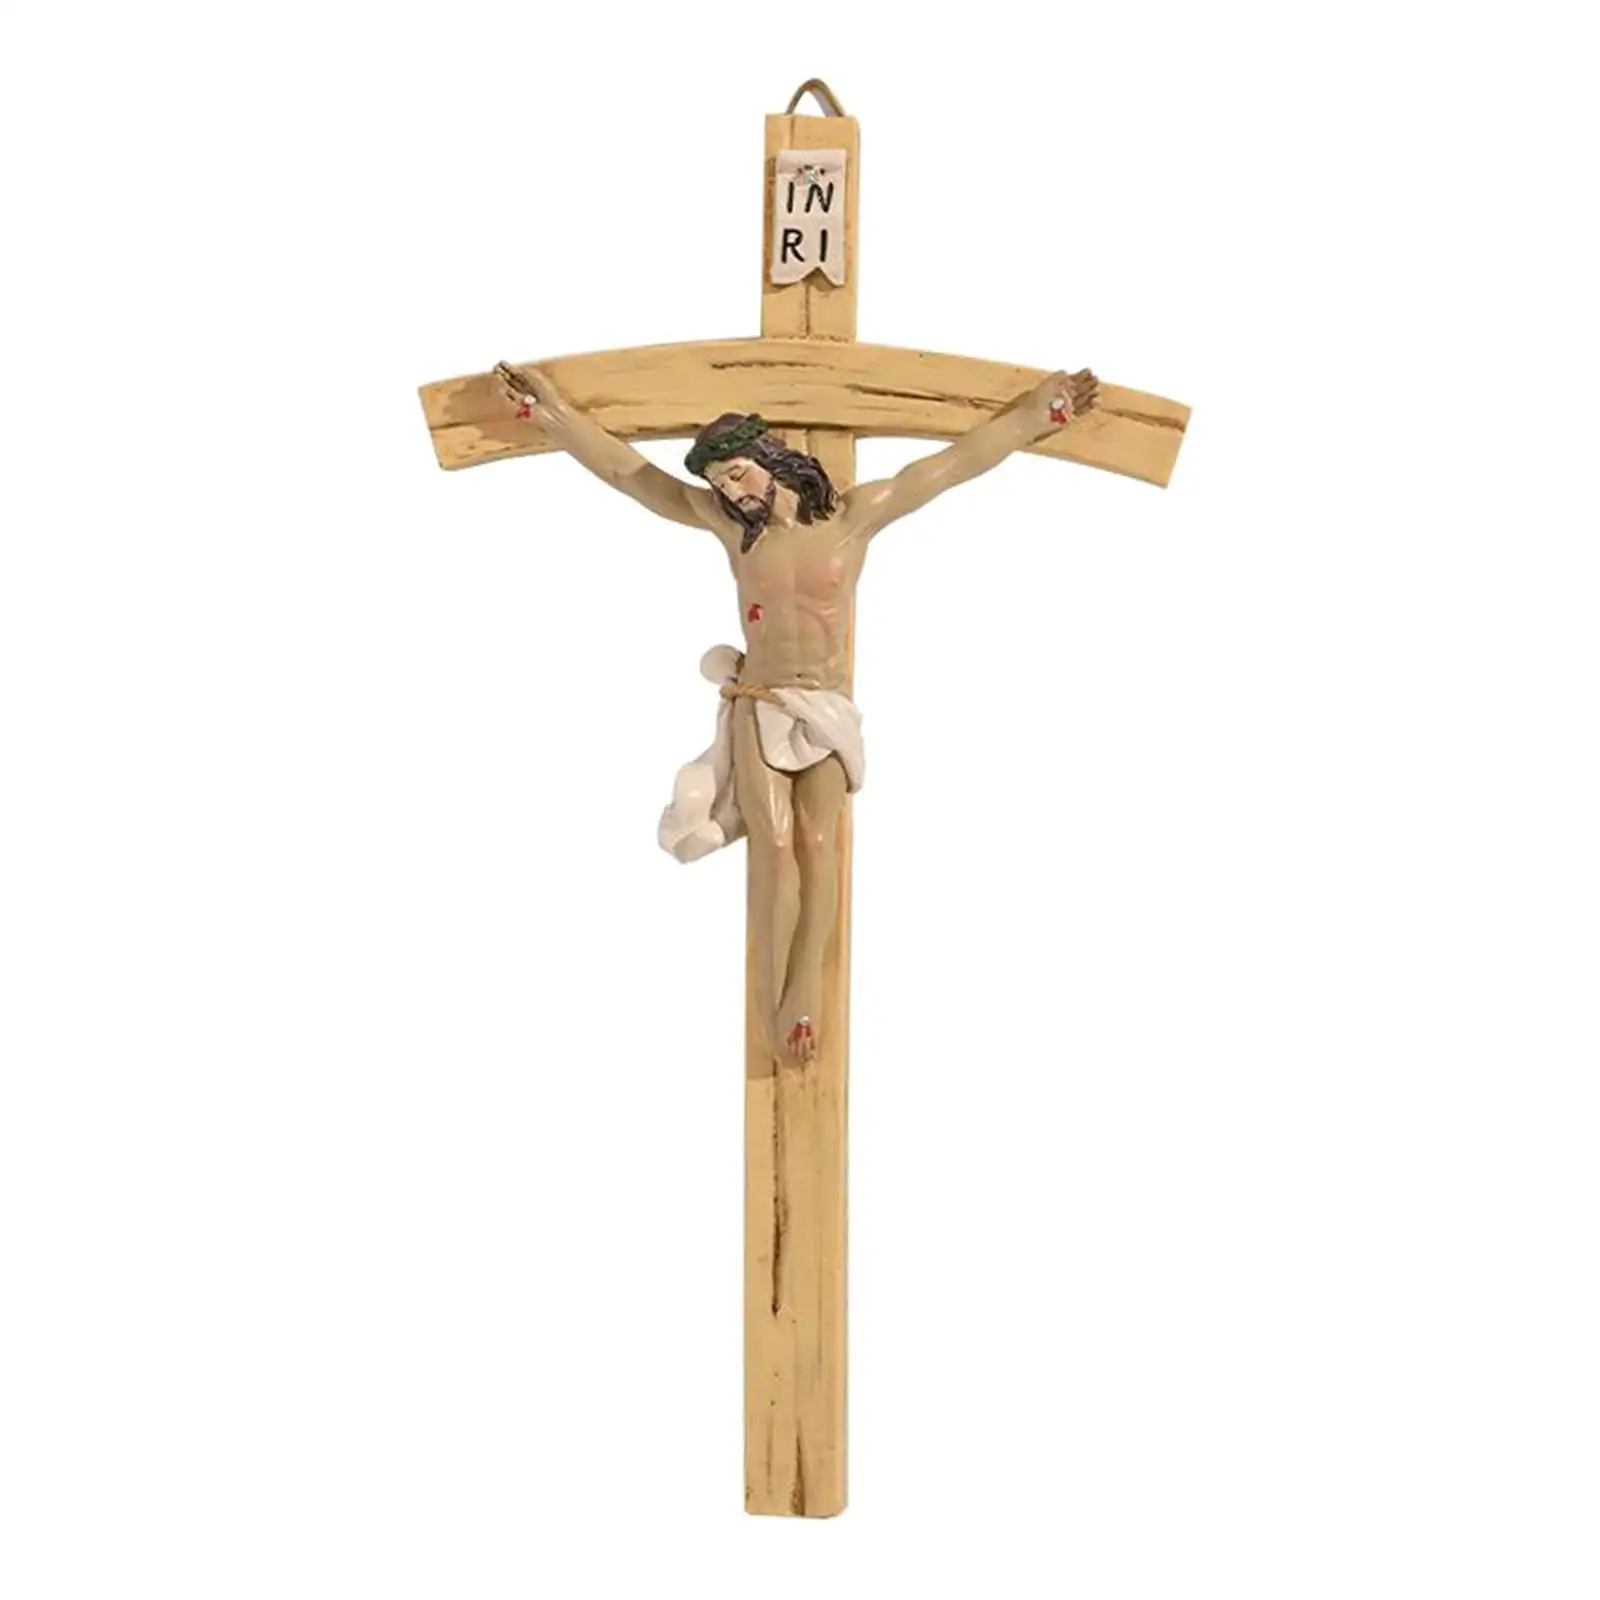 

8.7 "Vintage Like Wood Resin Wall Crucifix Hand-carved Holy Gifts